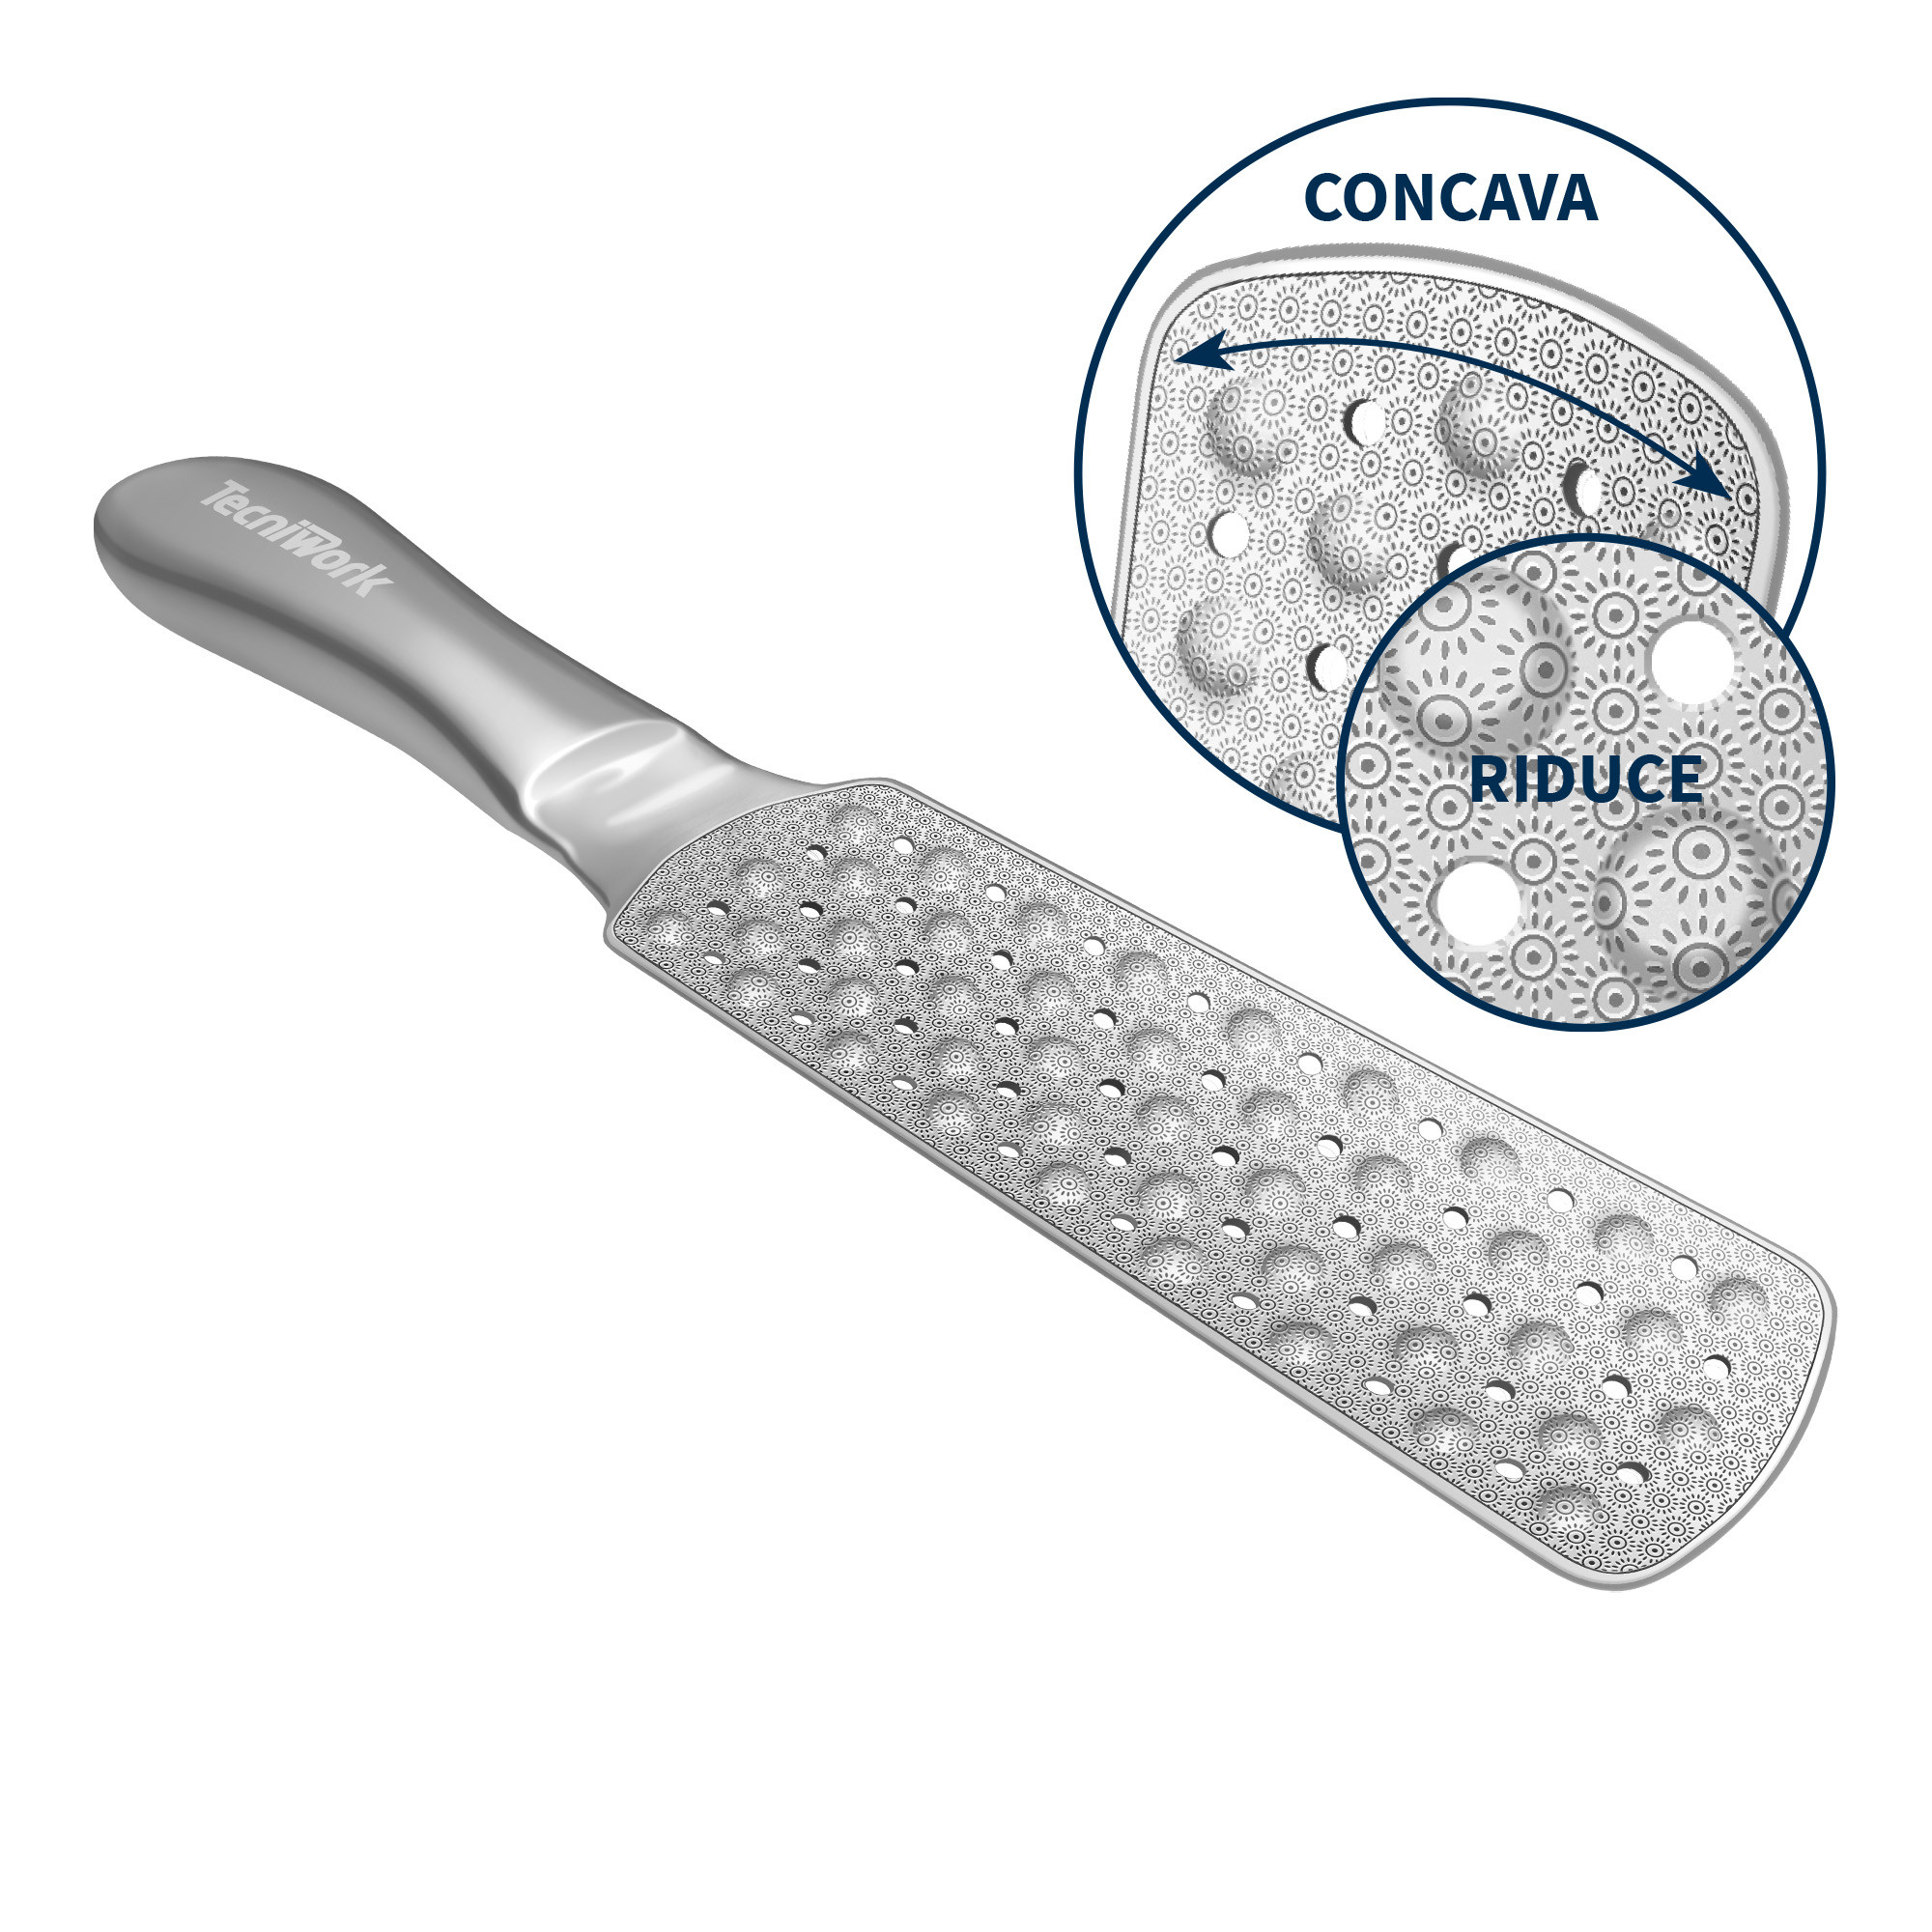 Callus Pro stainless steel foot file